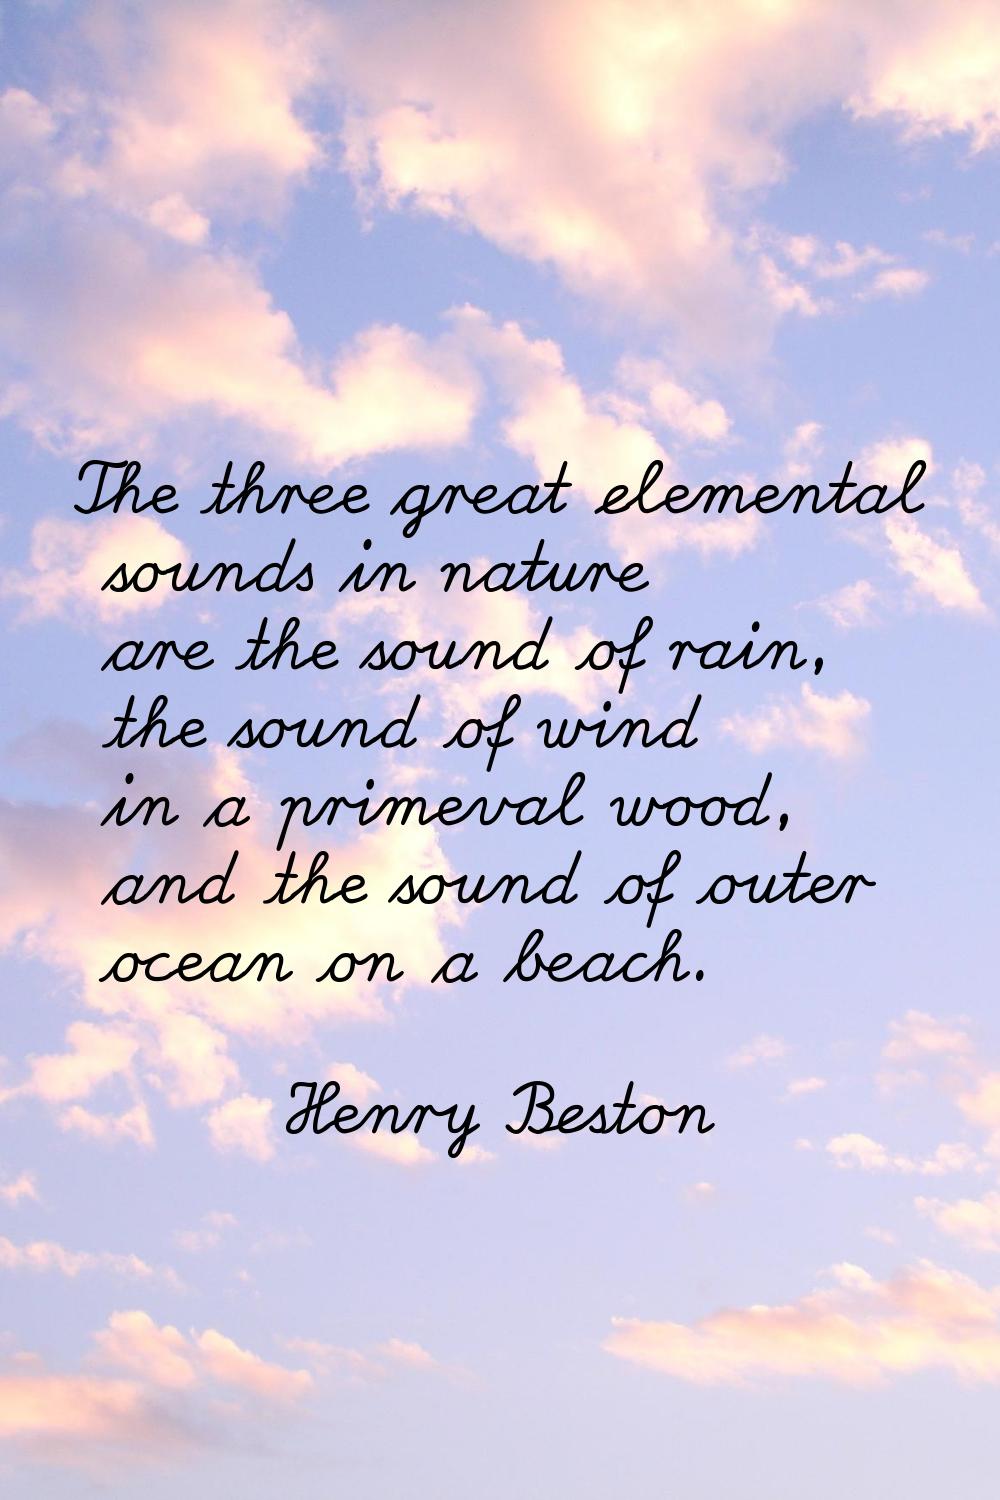 The three great elemental sounds in nature are the sound of rain, the sound of wind in a primeval w